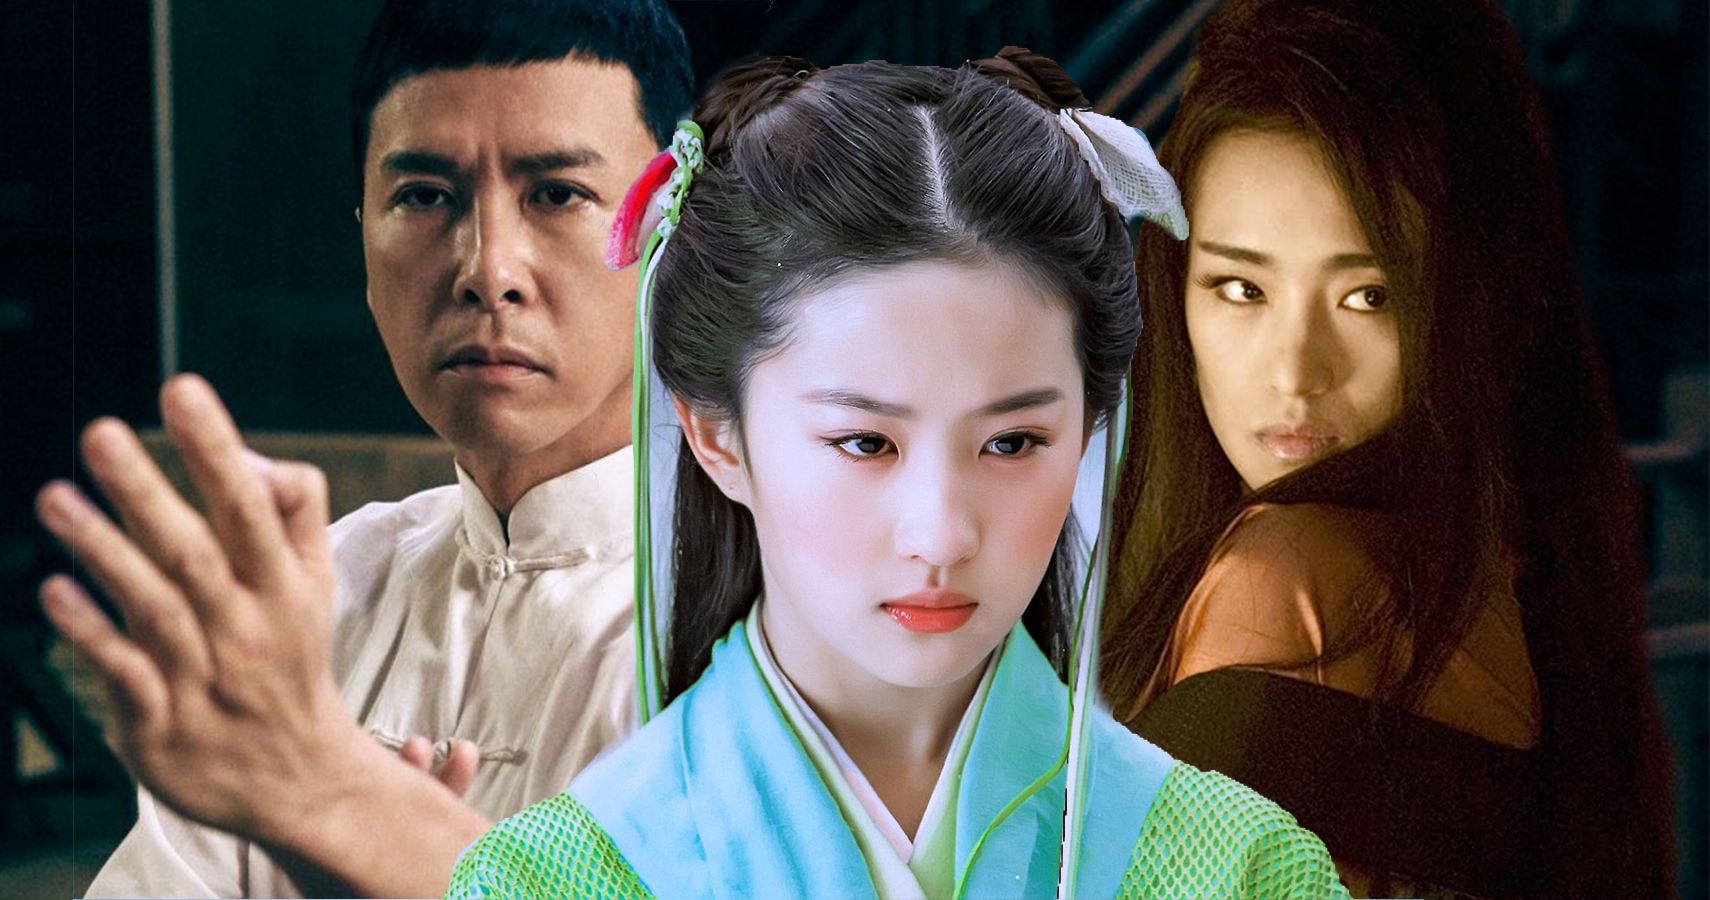 Mulan: Where You’ve Seen The Main Live-Action Cast Before